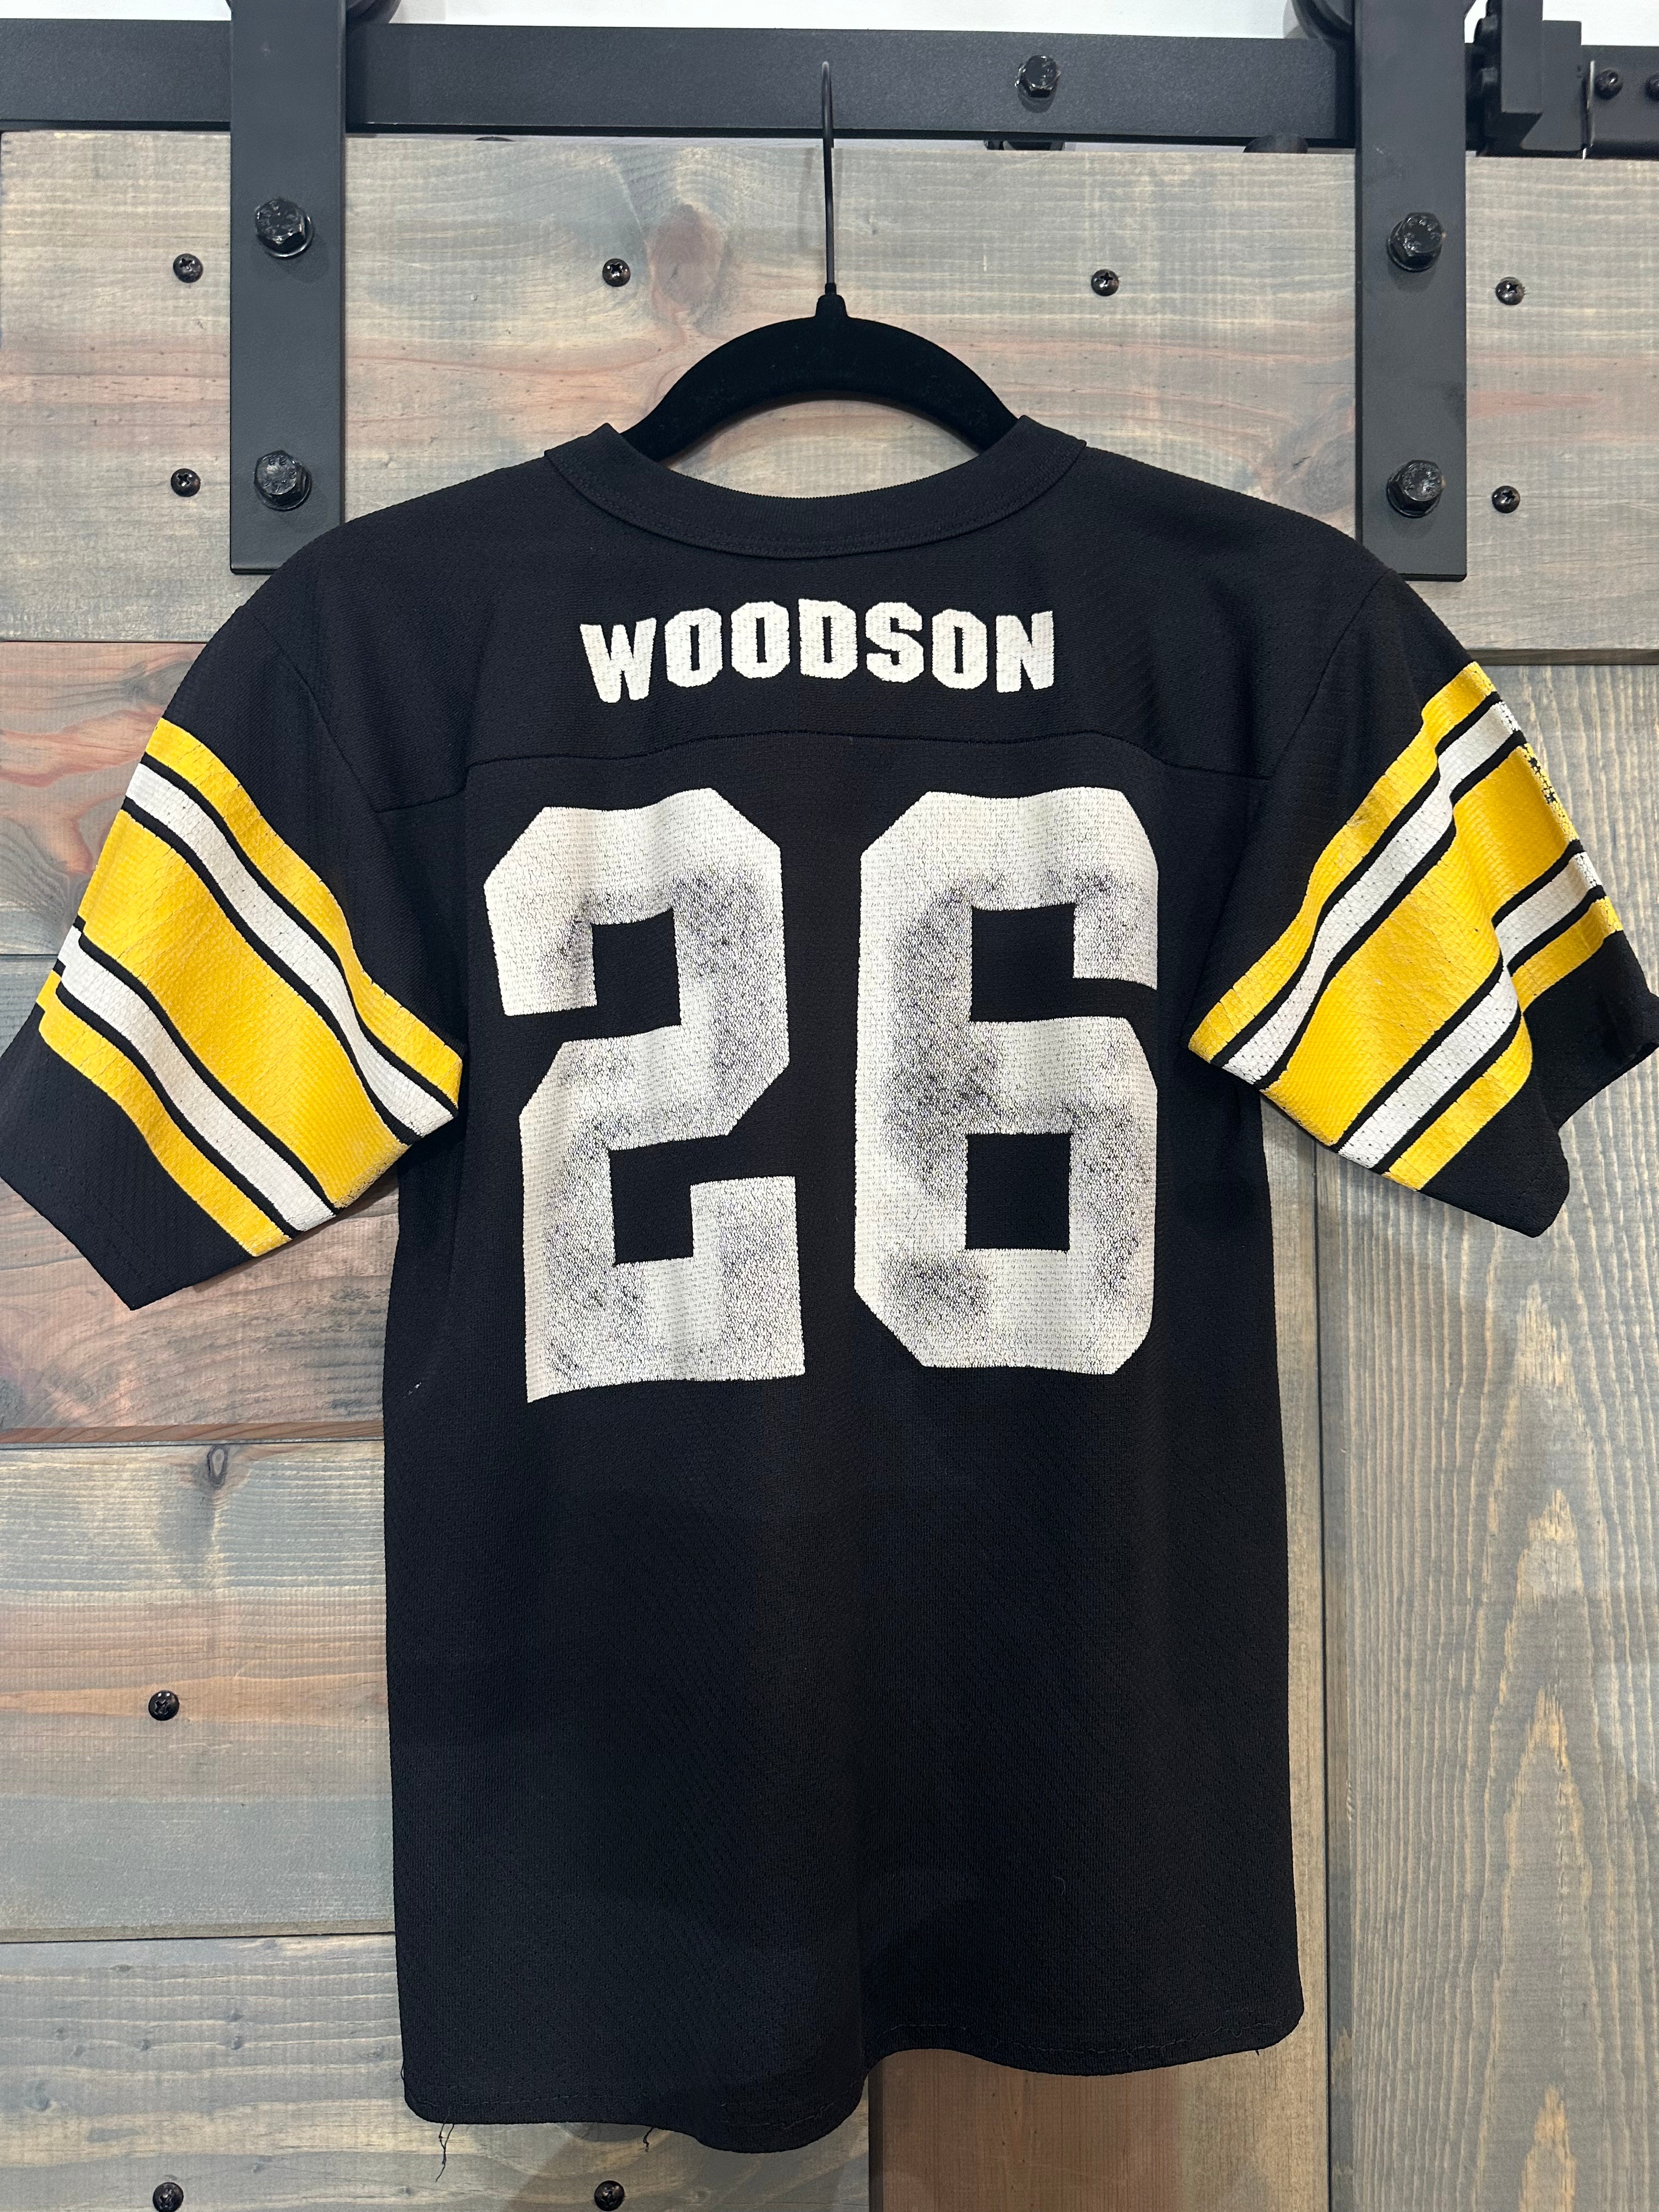 Rod Woodson Pittsburgh Steelers